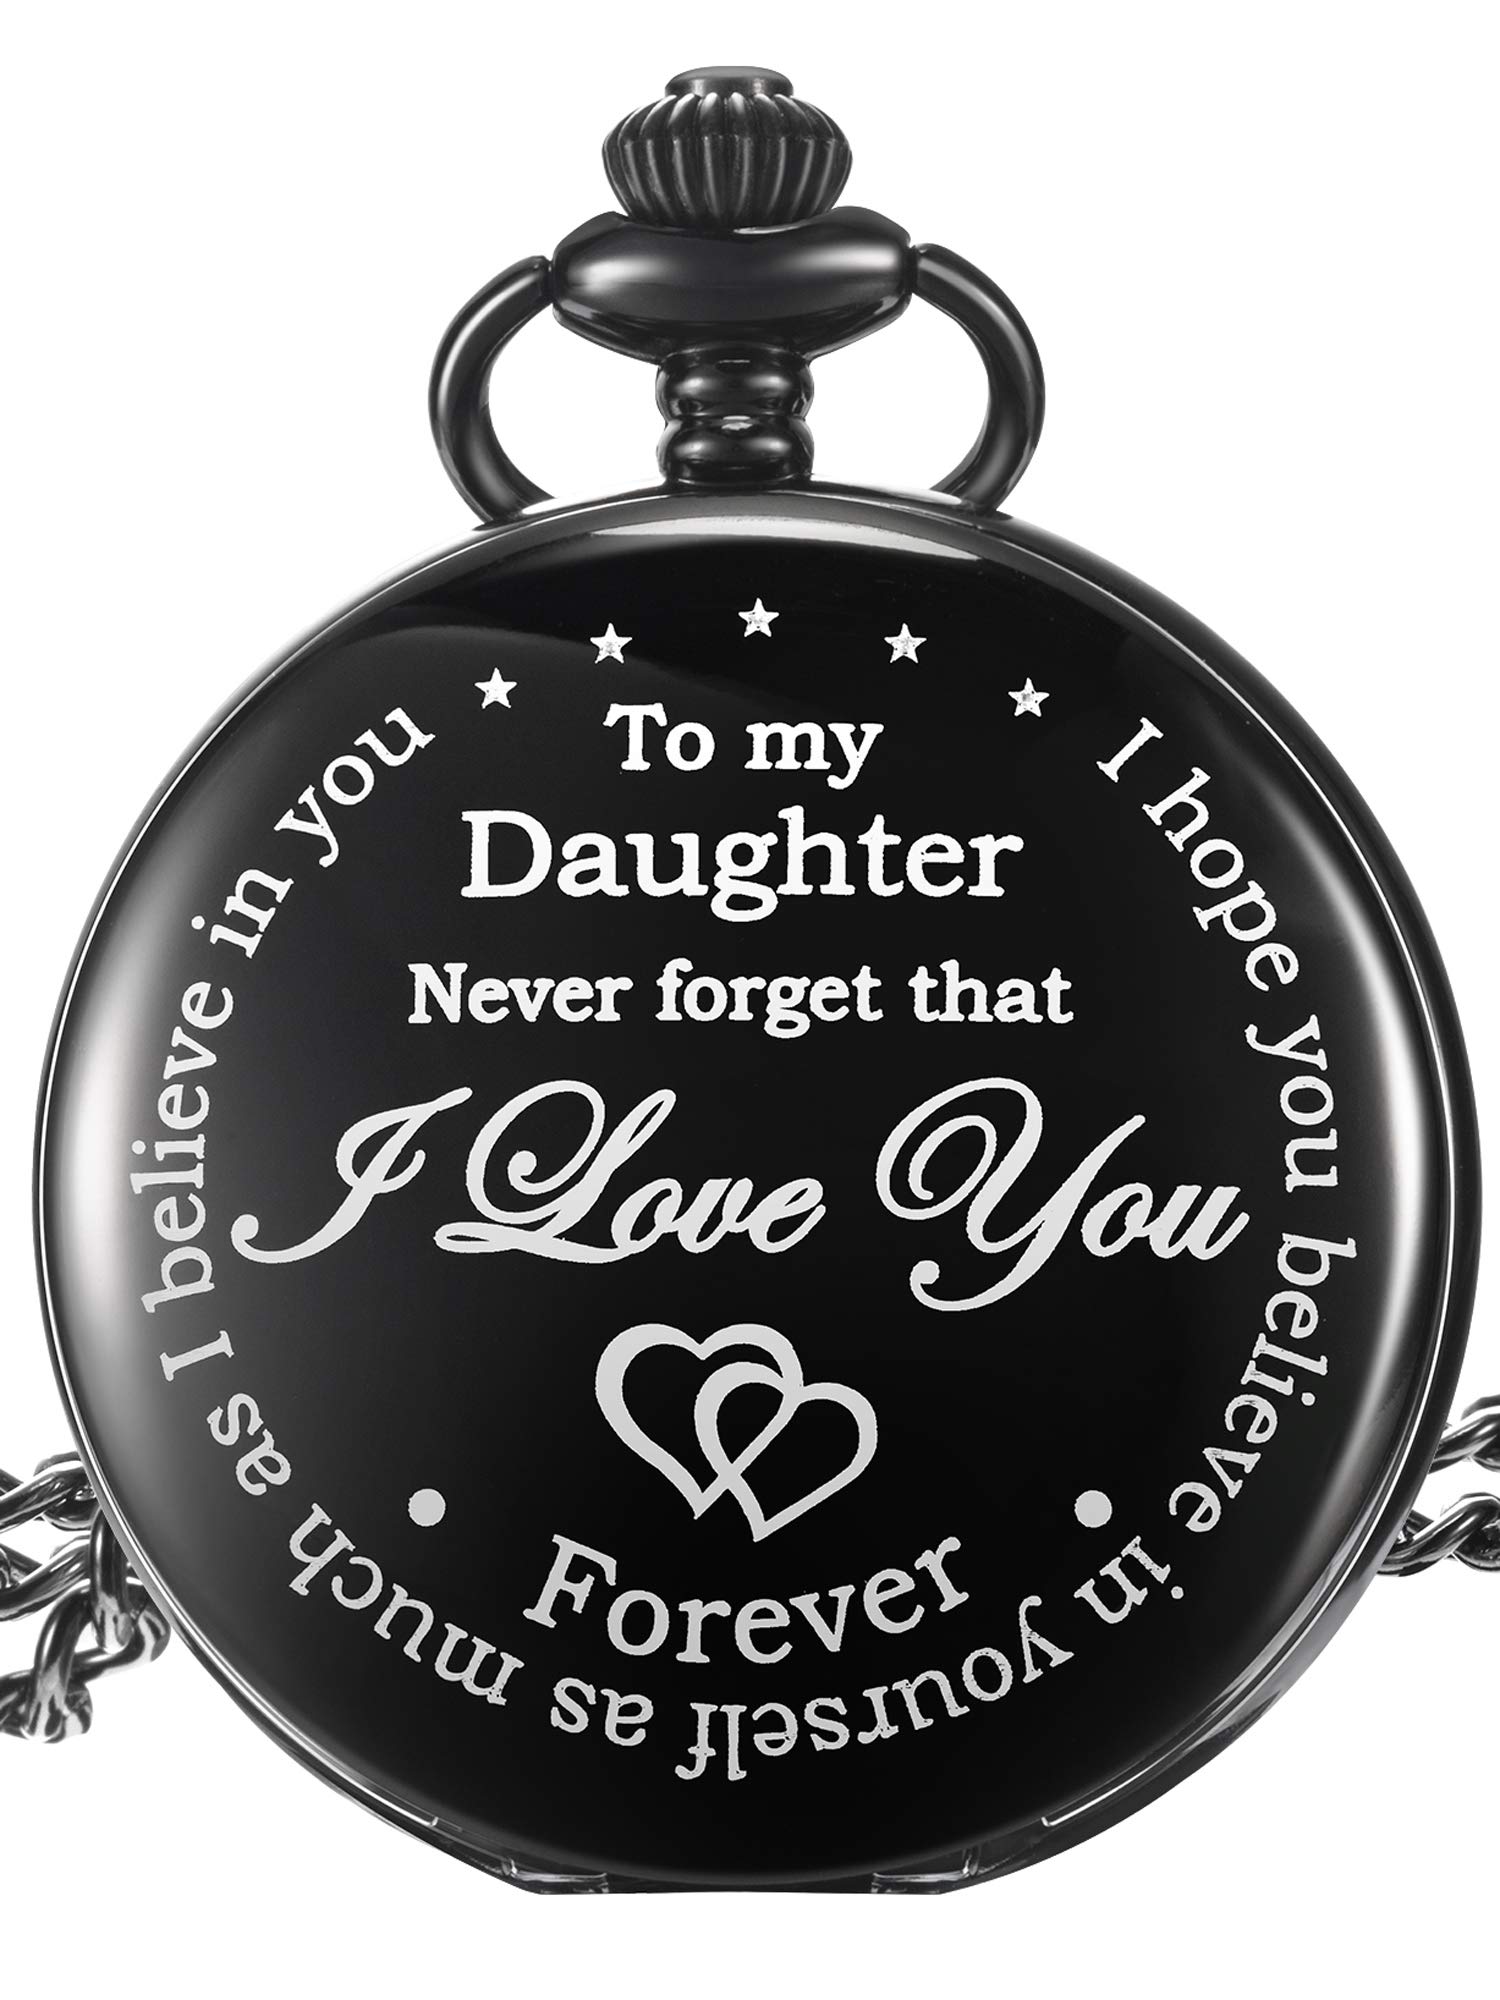 Pangda Christmas Inspirational Gift to My Daughter Never Forget That I Love You Steel Pocket Watch, Personalized Birthday Graduation Party Gift from Mom Dad to Daughter